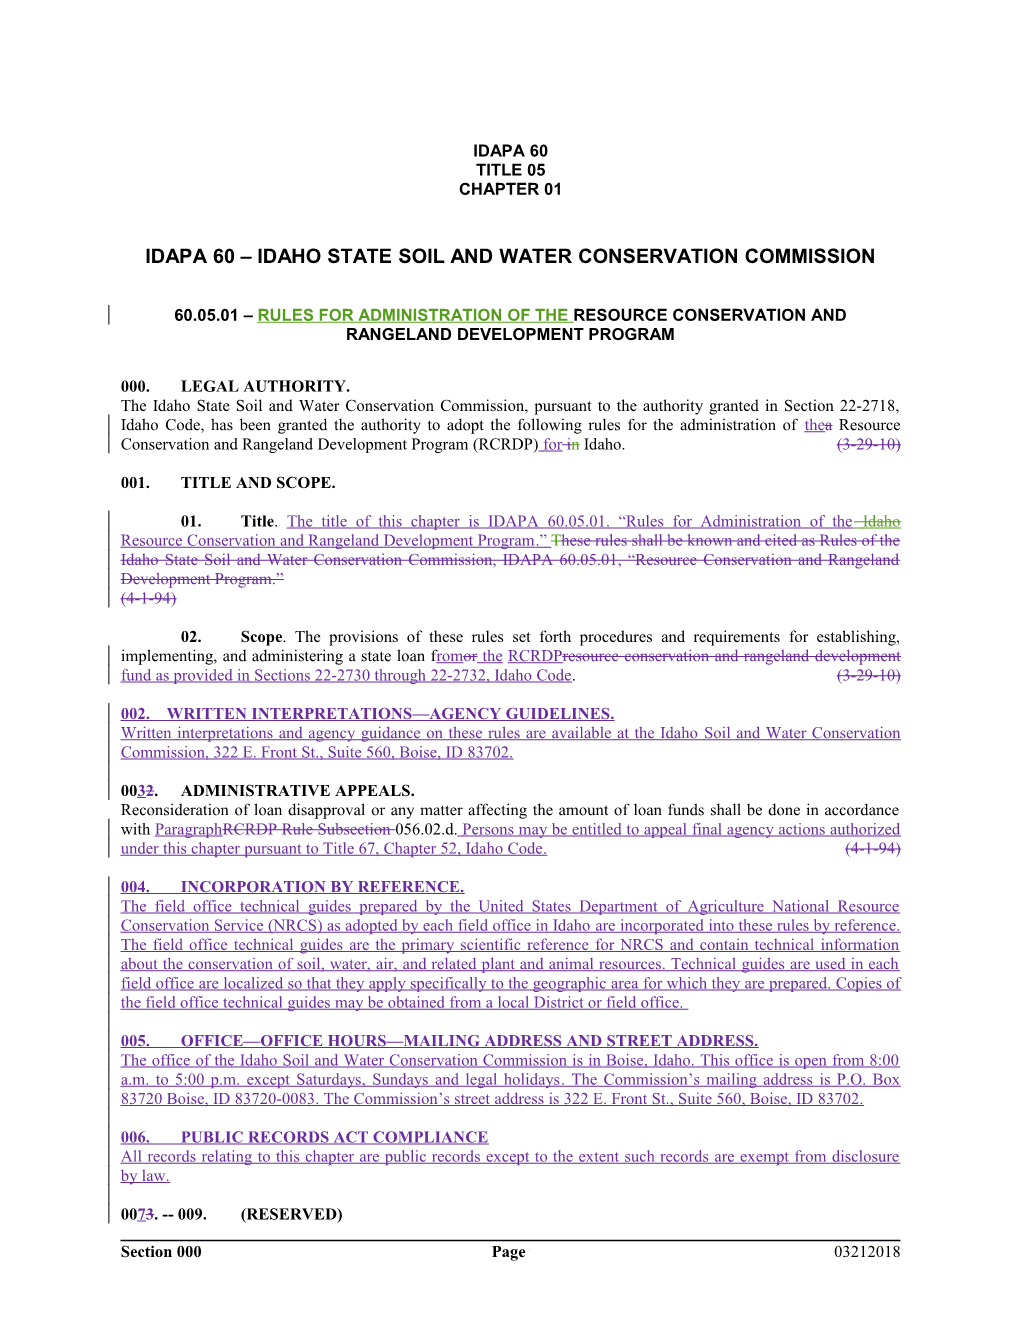 60.05.01 Rules for Administration of the Resource Conservation and Rangeland Development